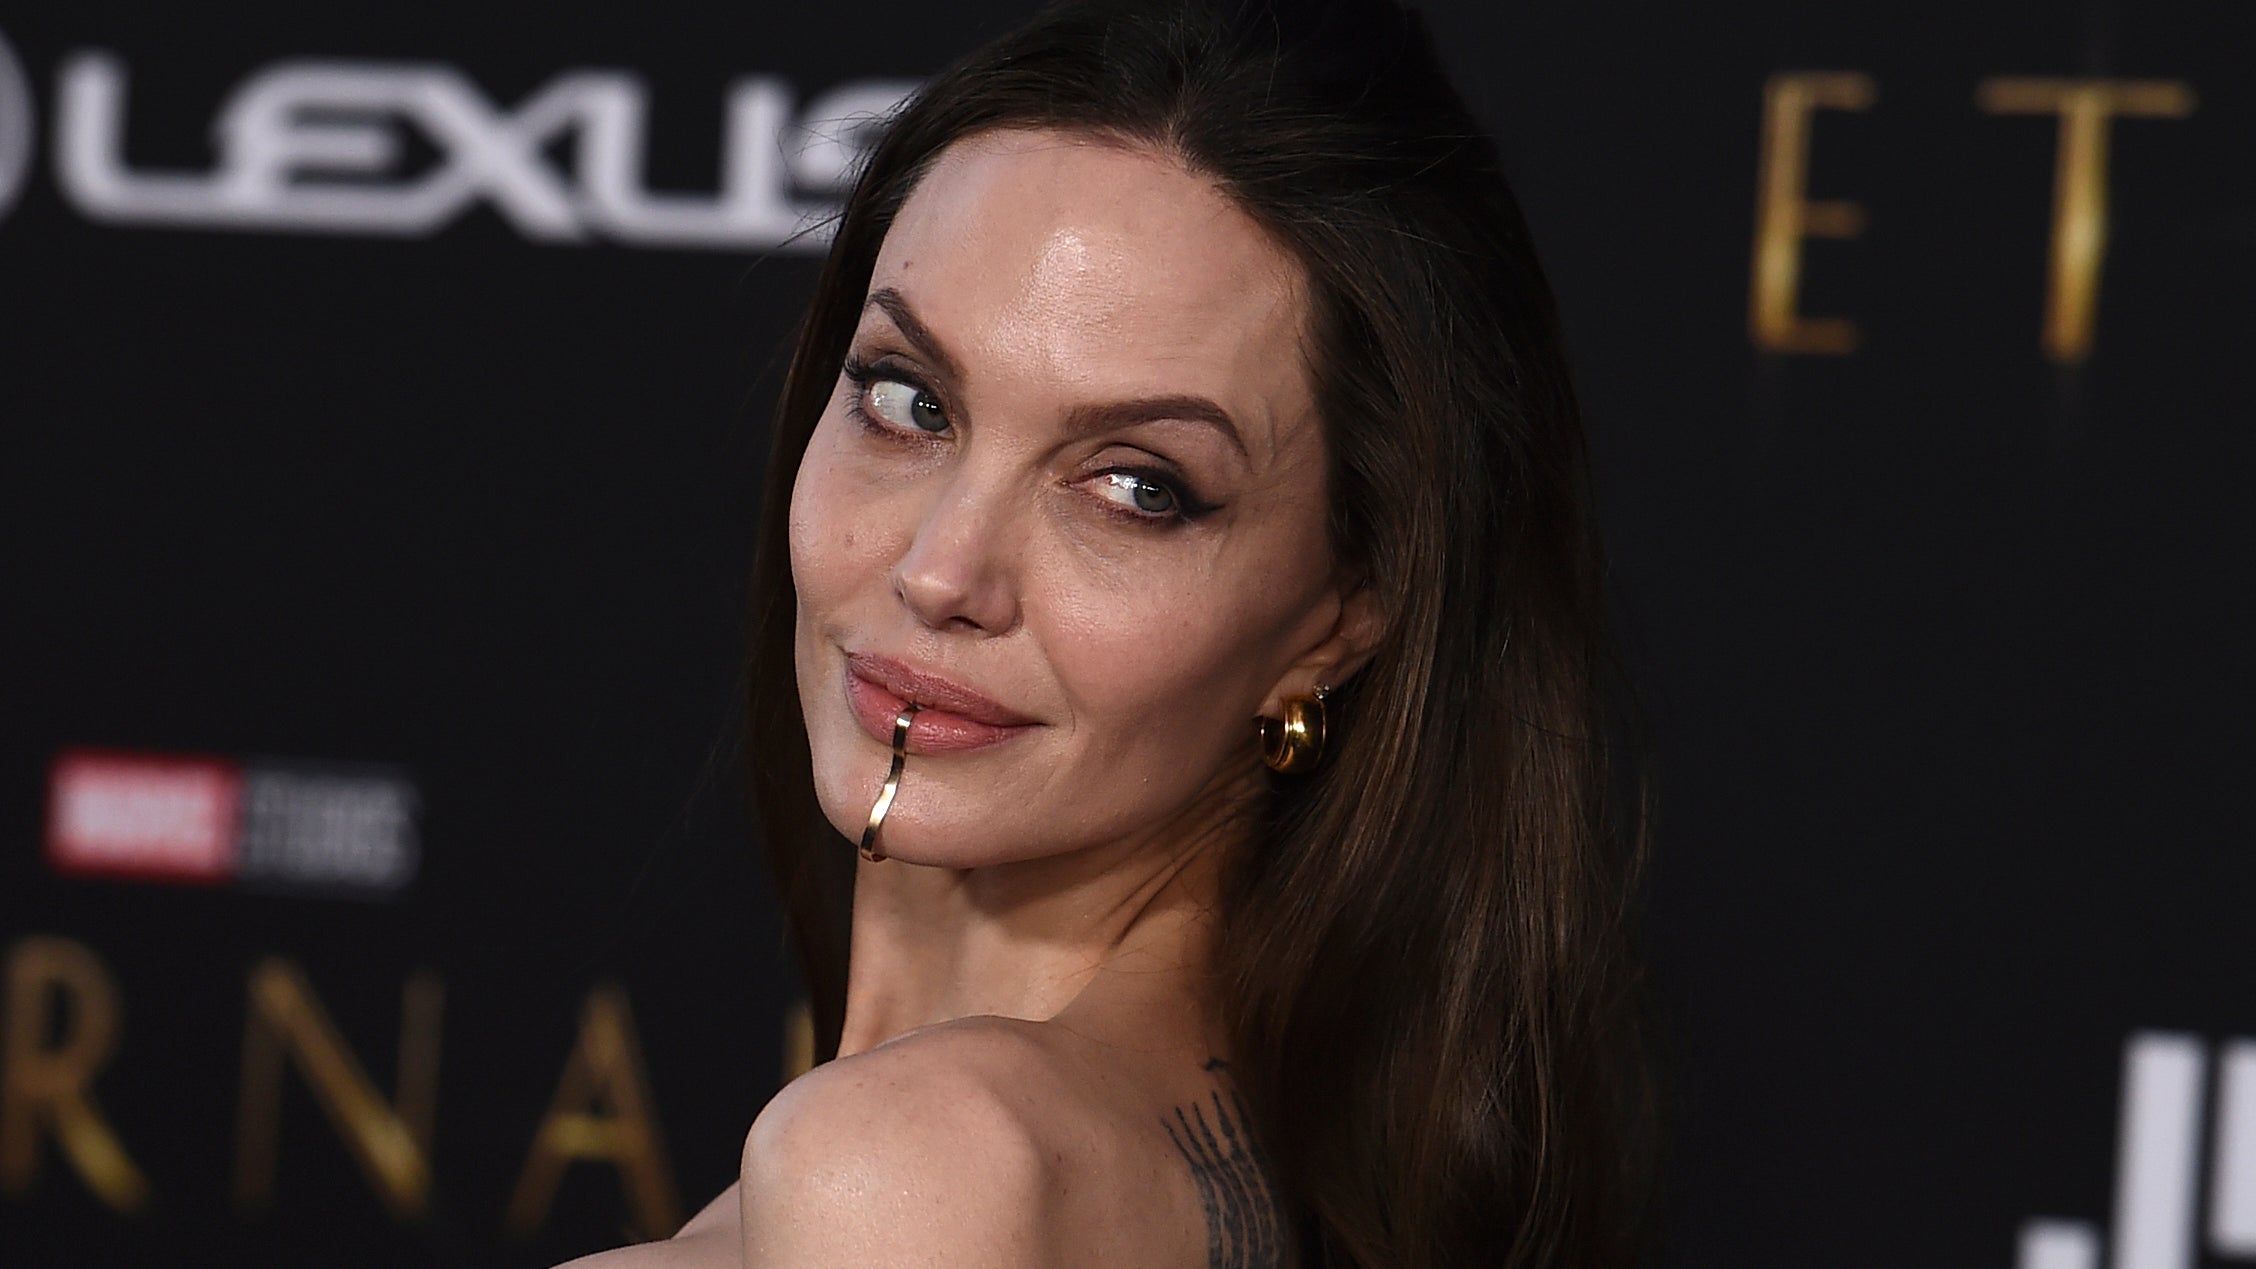 Angelina Jolie Wears Opinion Dividing Chin Cuff On The Red Carpet